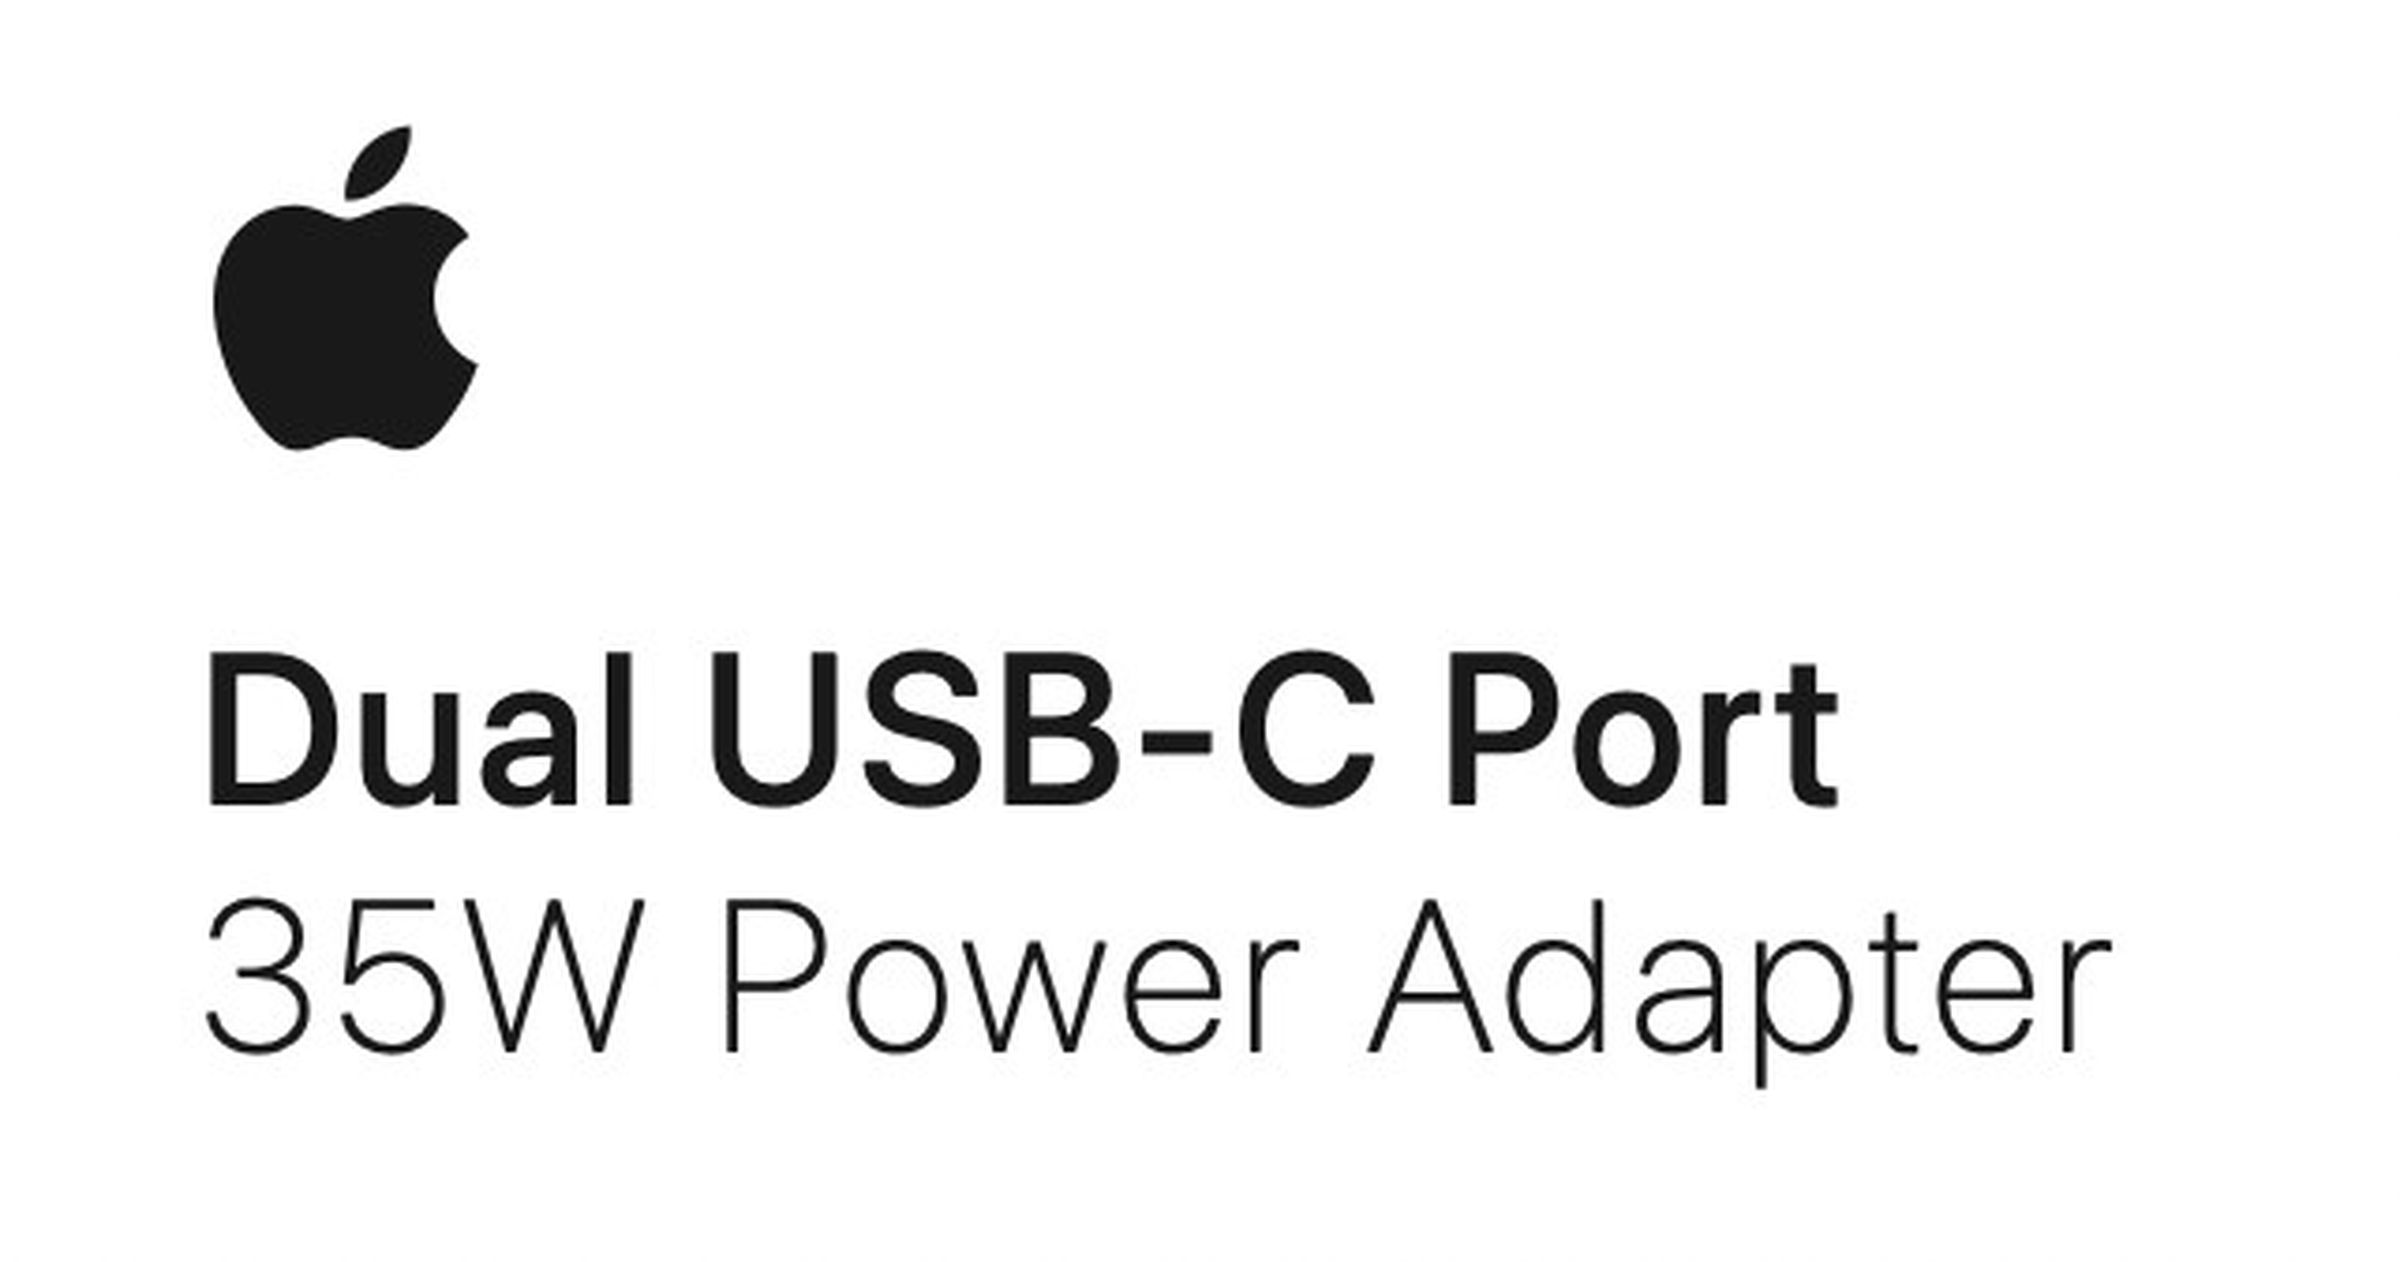 9to5Mac screenshotted an official support document confirming the name “Dual USB-C Port 35W Power Adapter”